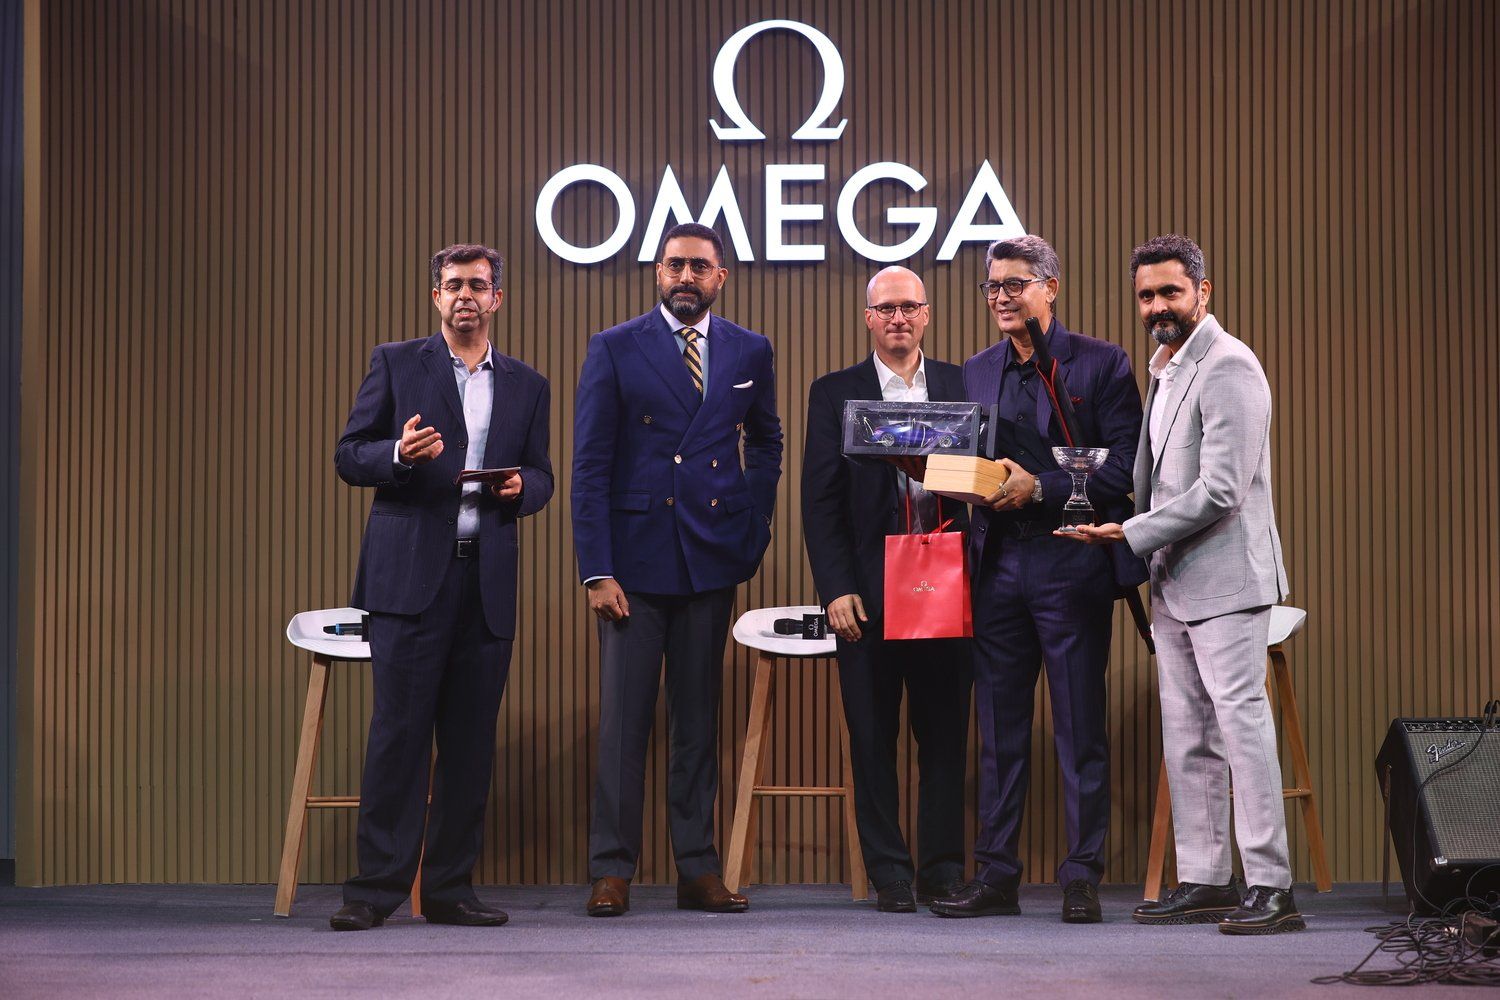 The successful event was a coming together to celebrate Omega’s passion for golf and watches